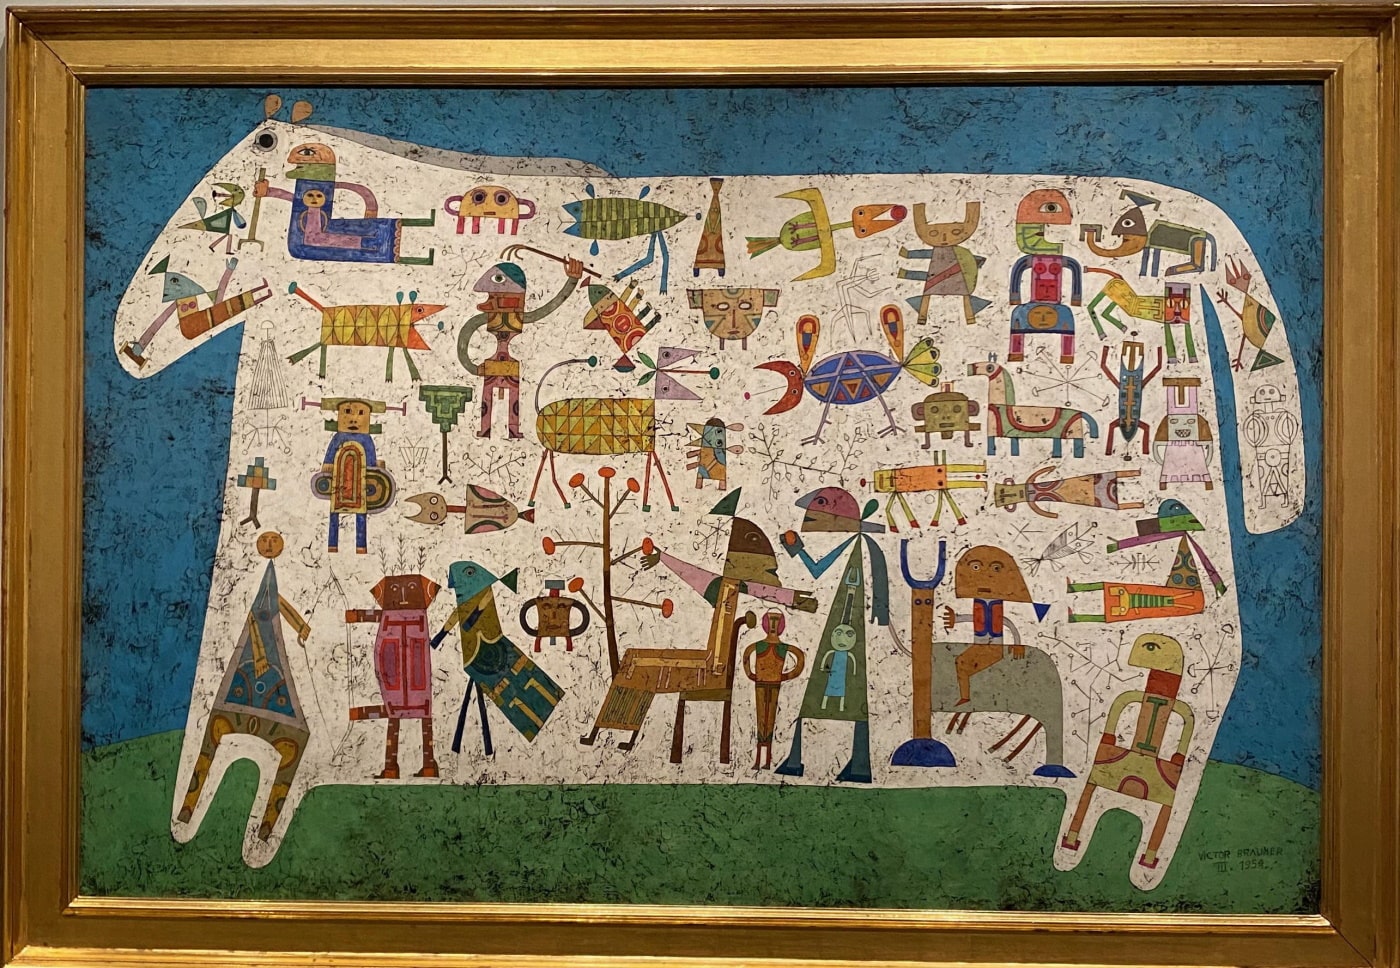 Prelude to a civilization by Victor Brauner